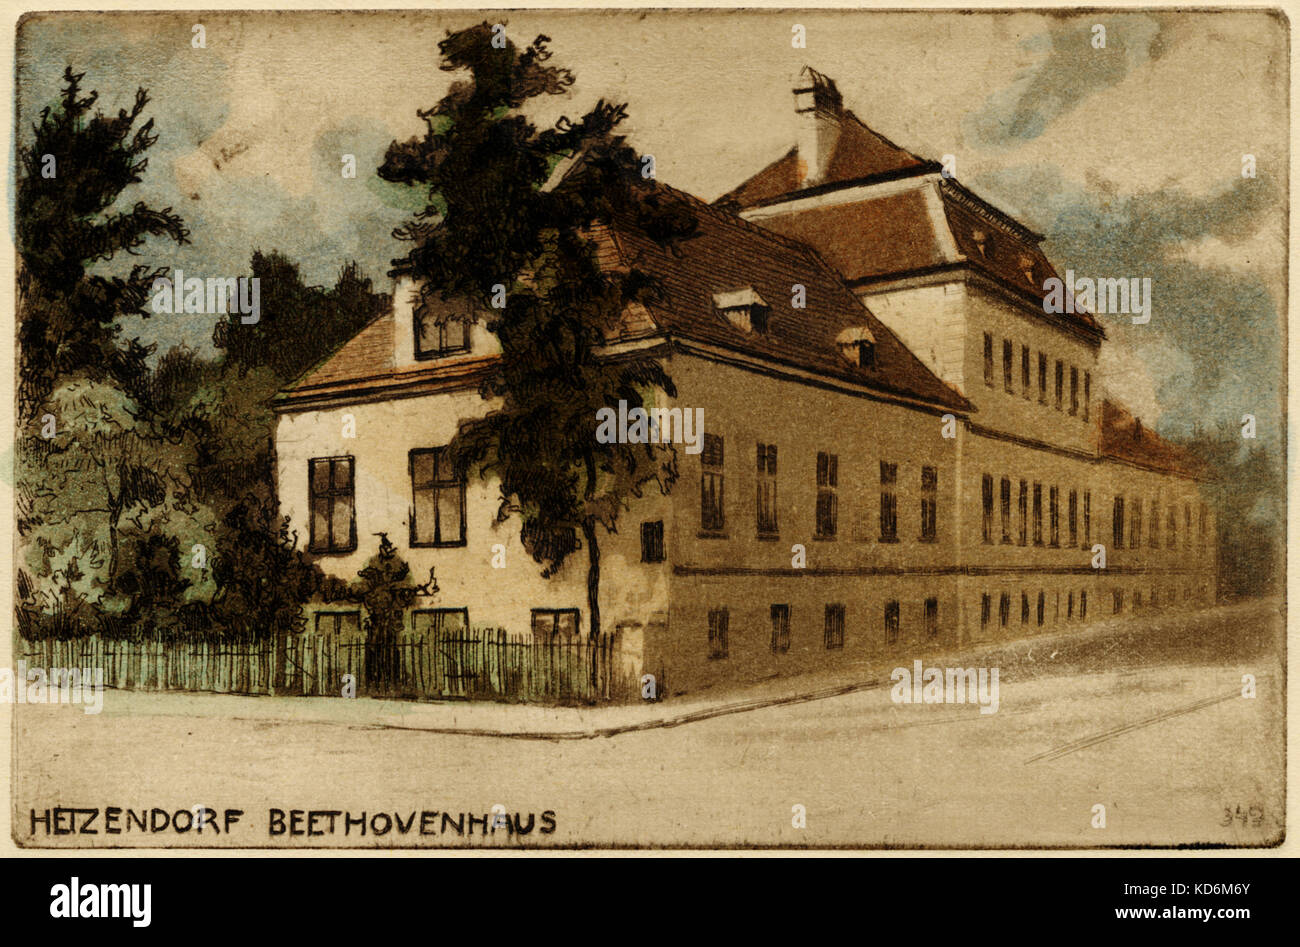 Ludwig van Beethoven 's house in Hetzendorf , Vienna. Drawn by L V Pollak. German composer, 17 December 1770 - 26 March 1827. His summer retreat in 1801, 1804, 1805 and where he composed Fidelio. Postcard Stock Photo